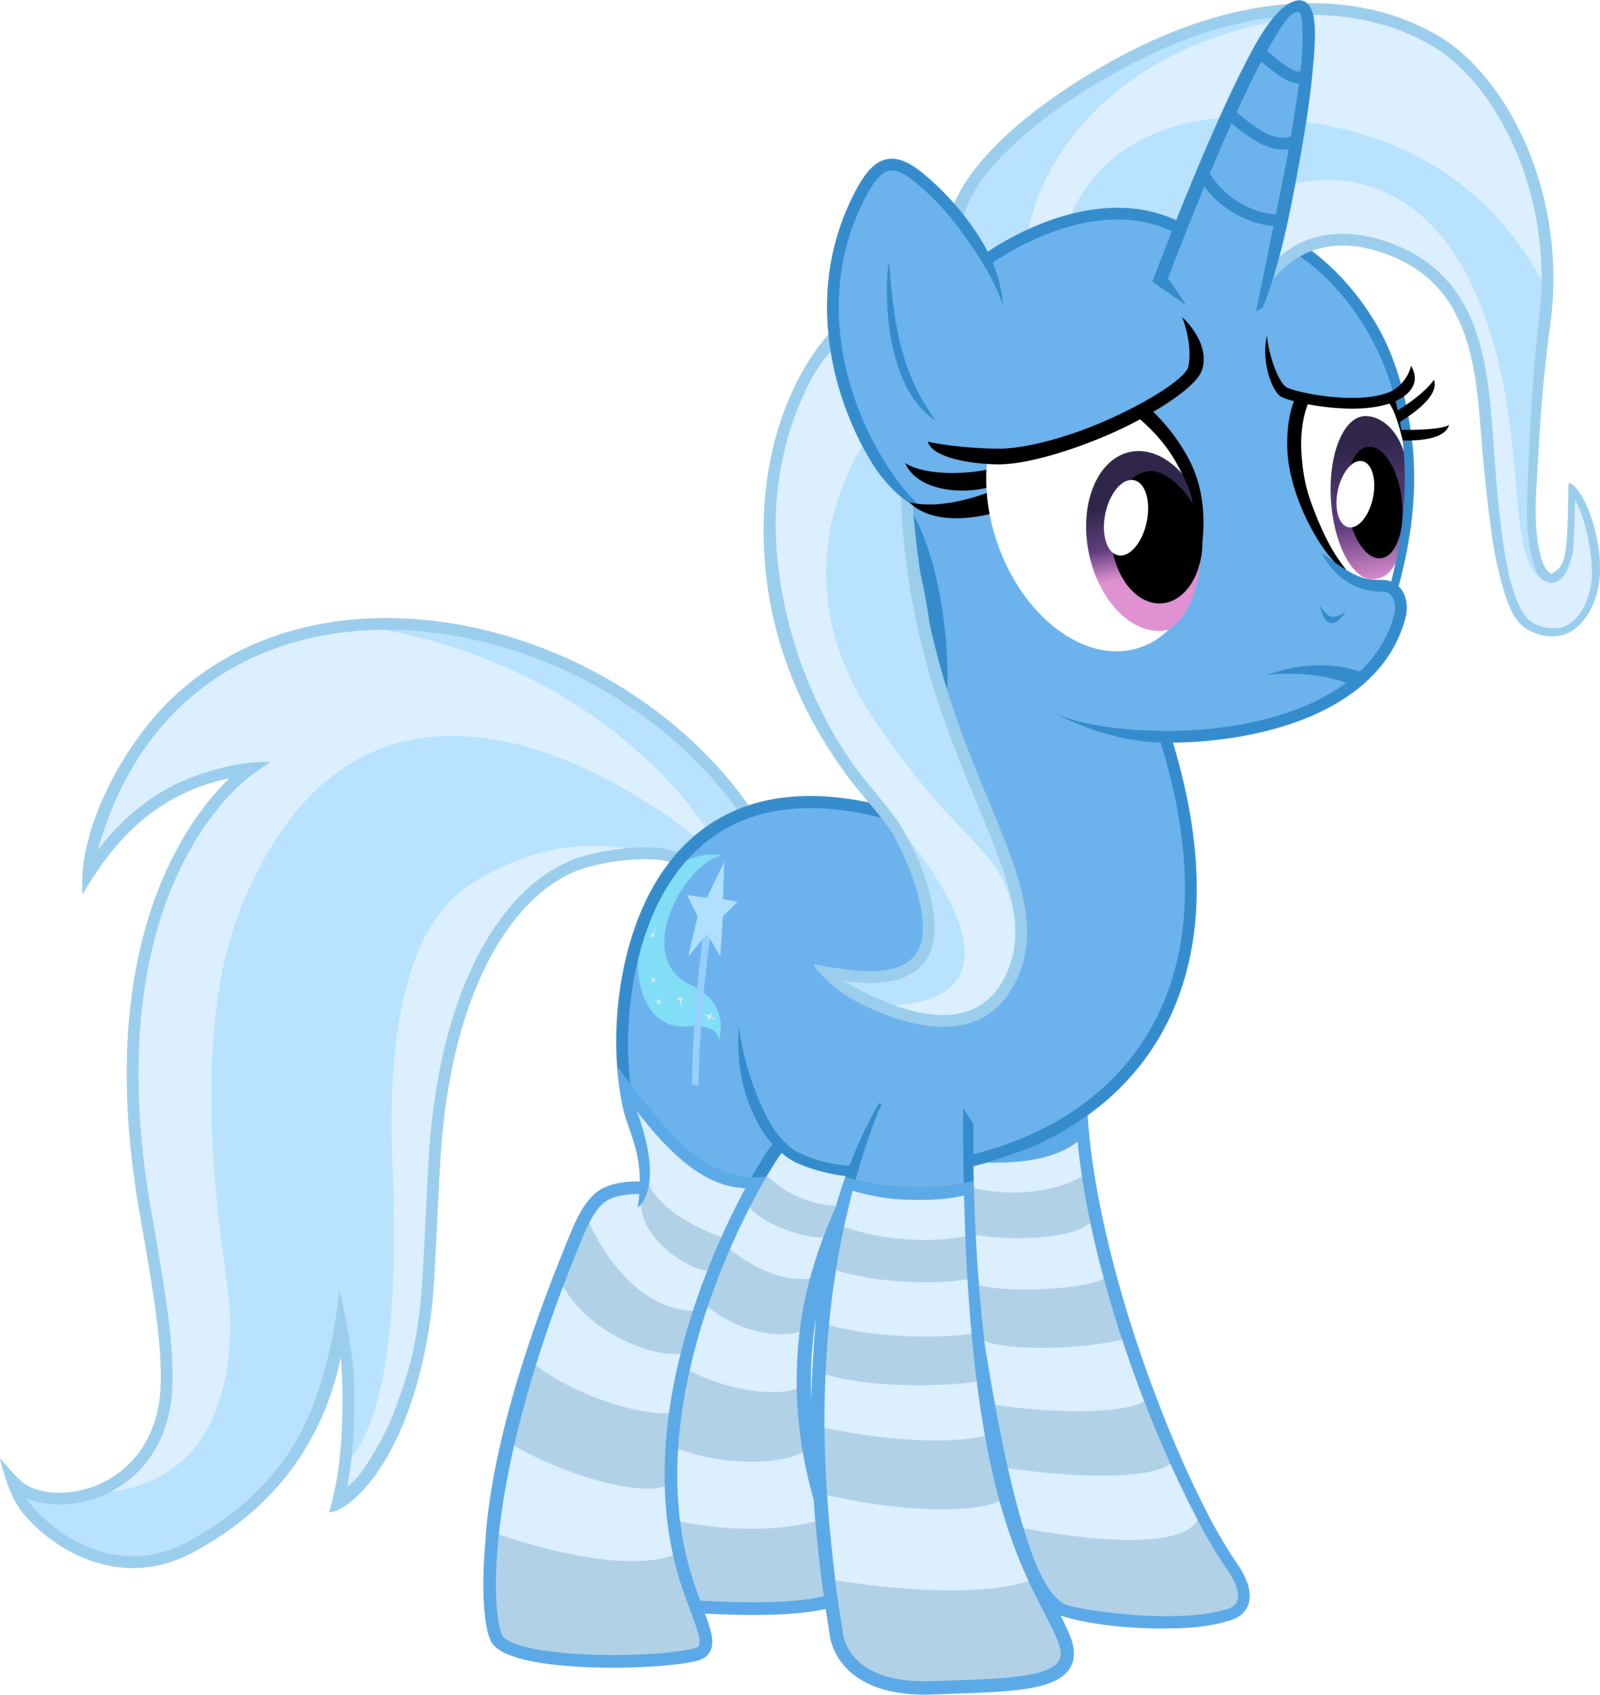 Trixie Using Great And Powerful Socks By Marcosms88 - Great And Powerful Trixie Sexy (1600x1695)